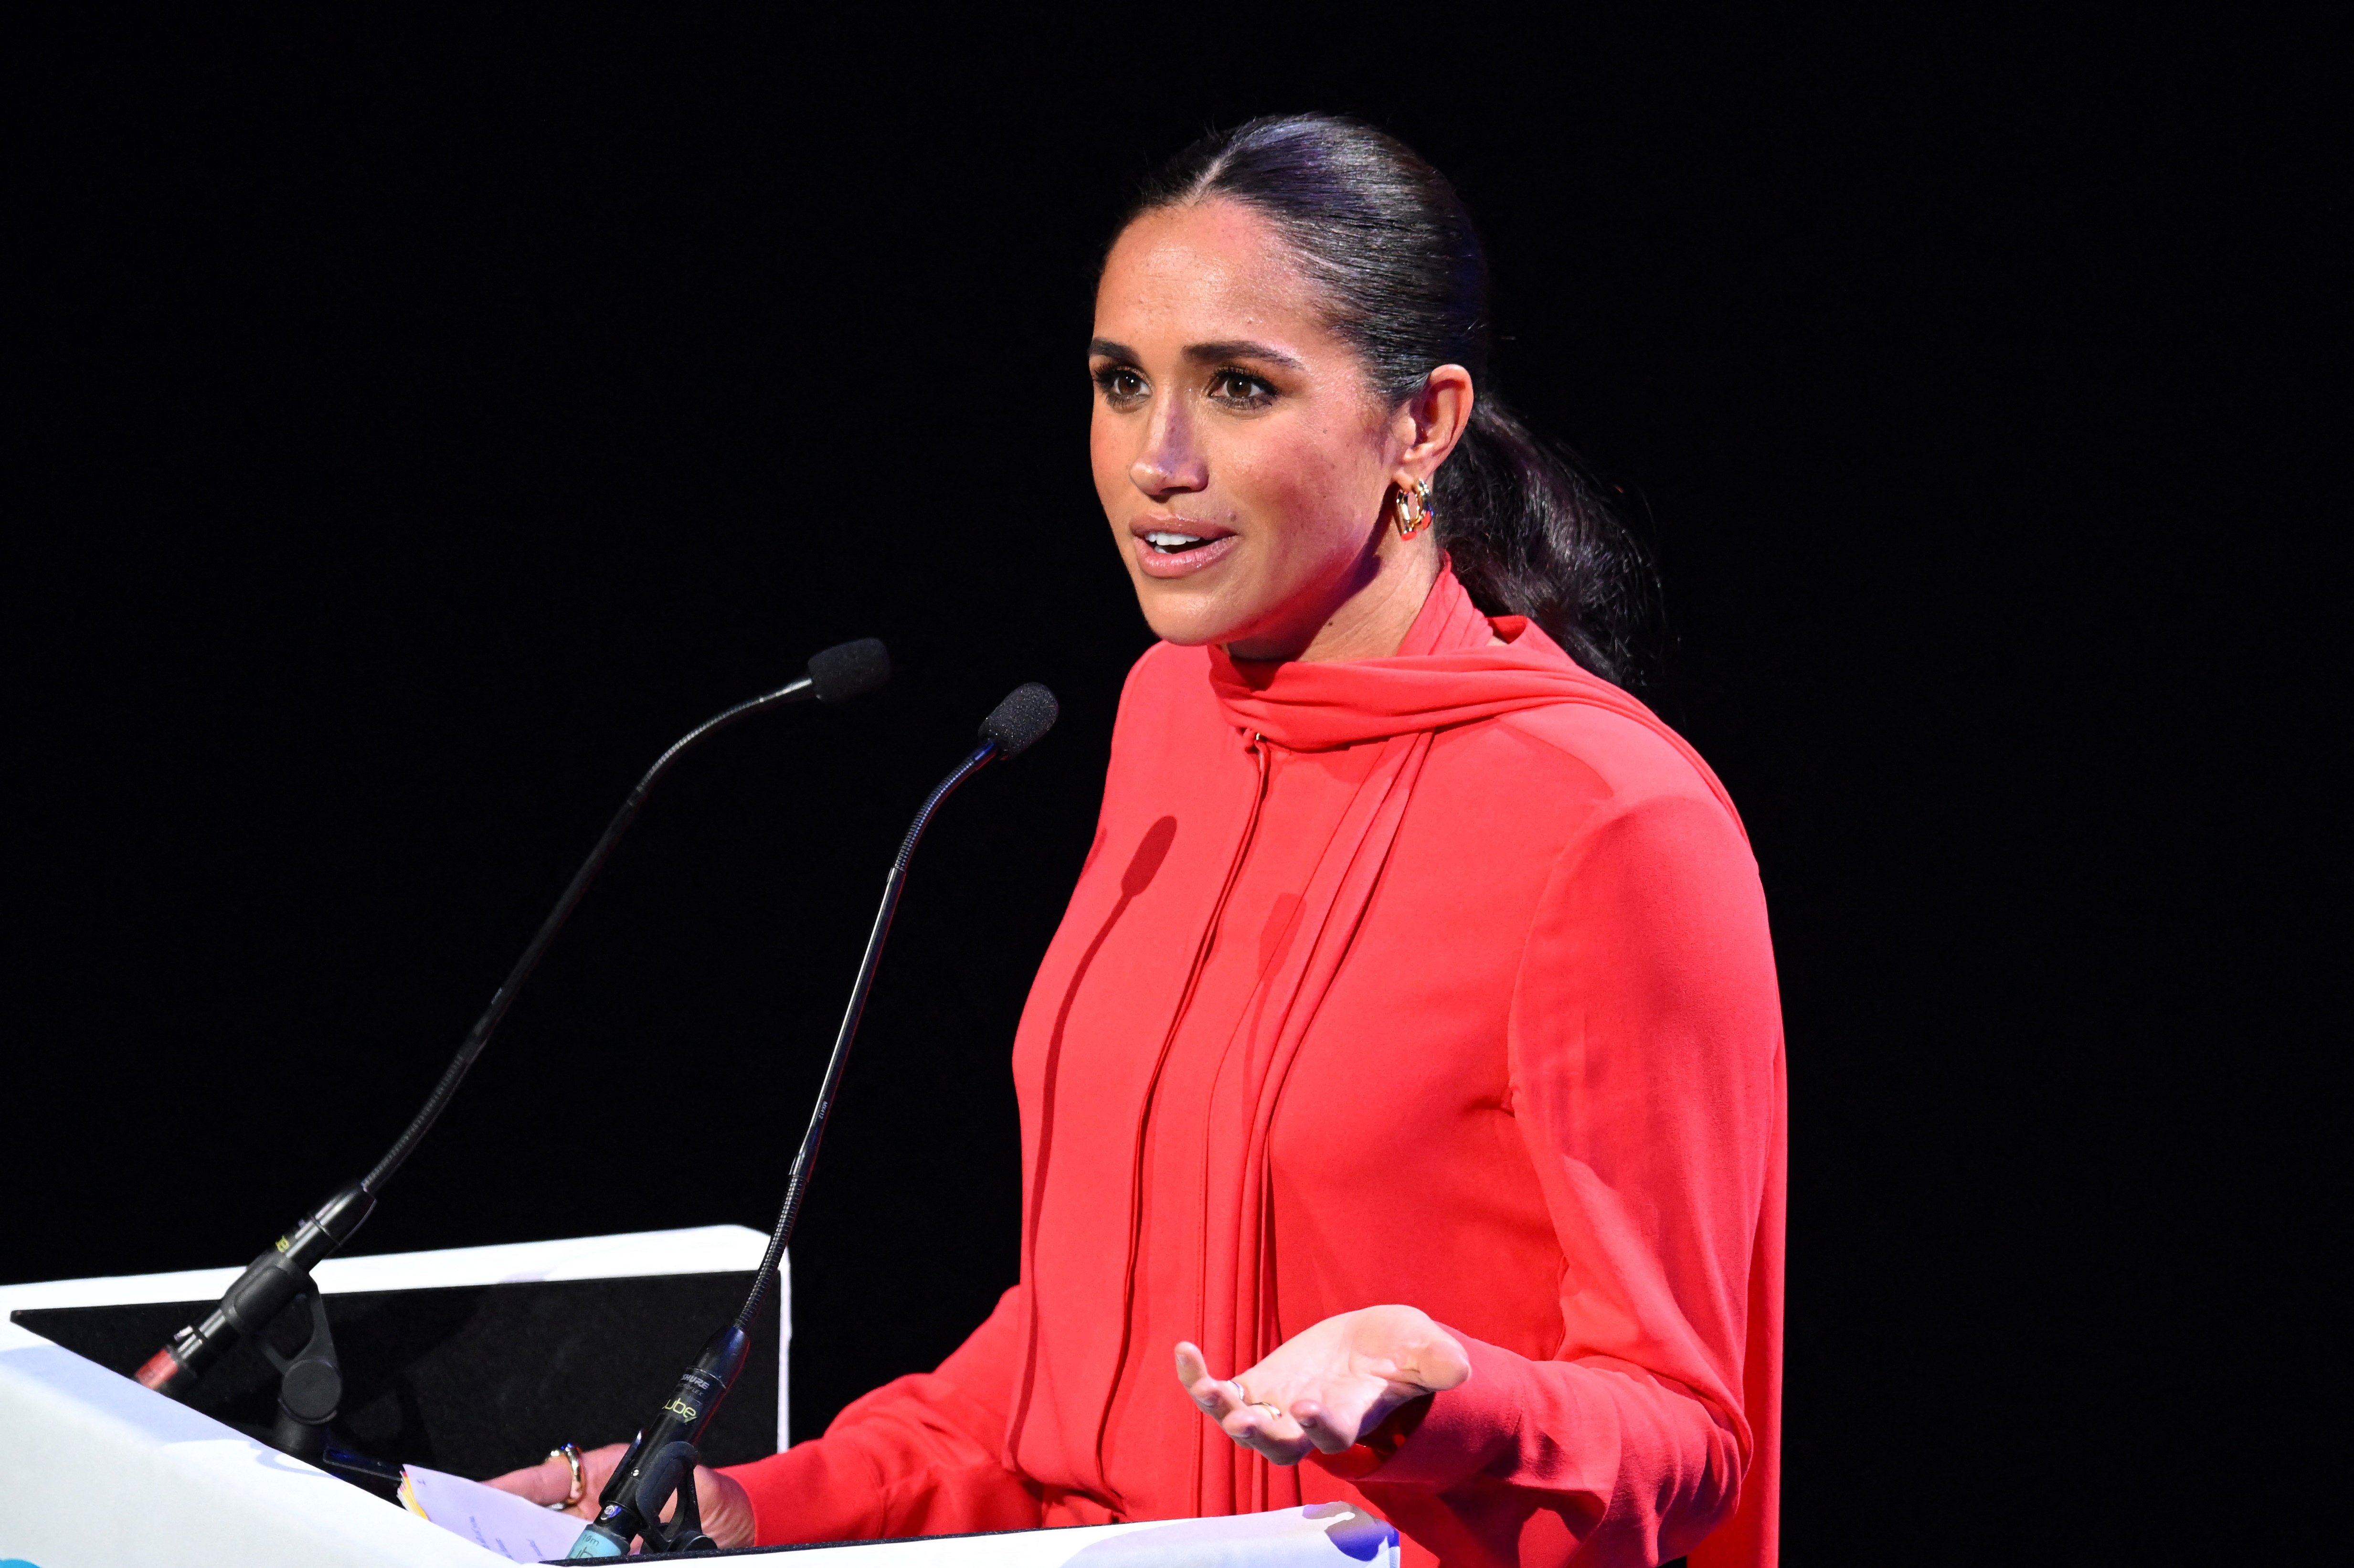 The Duchess of Sussex attends the One Young World 2022 Manchester Summit at Bridgewater Hall, Manchester, during their visit to the UK. | Source: Getty Images